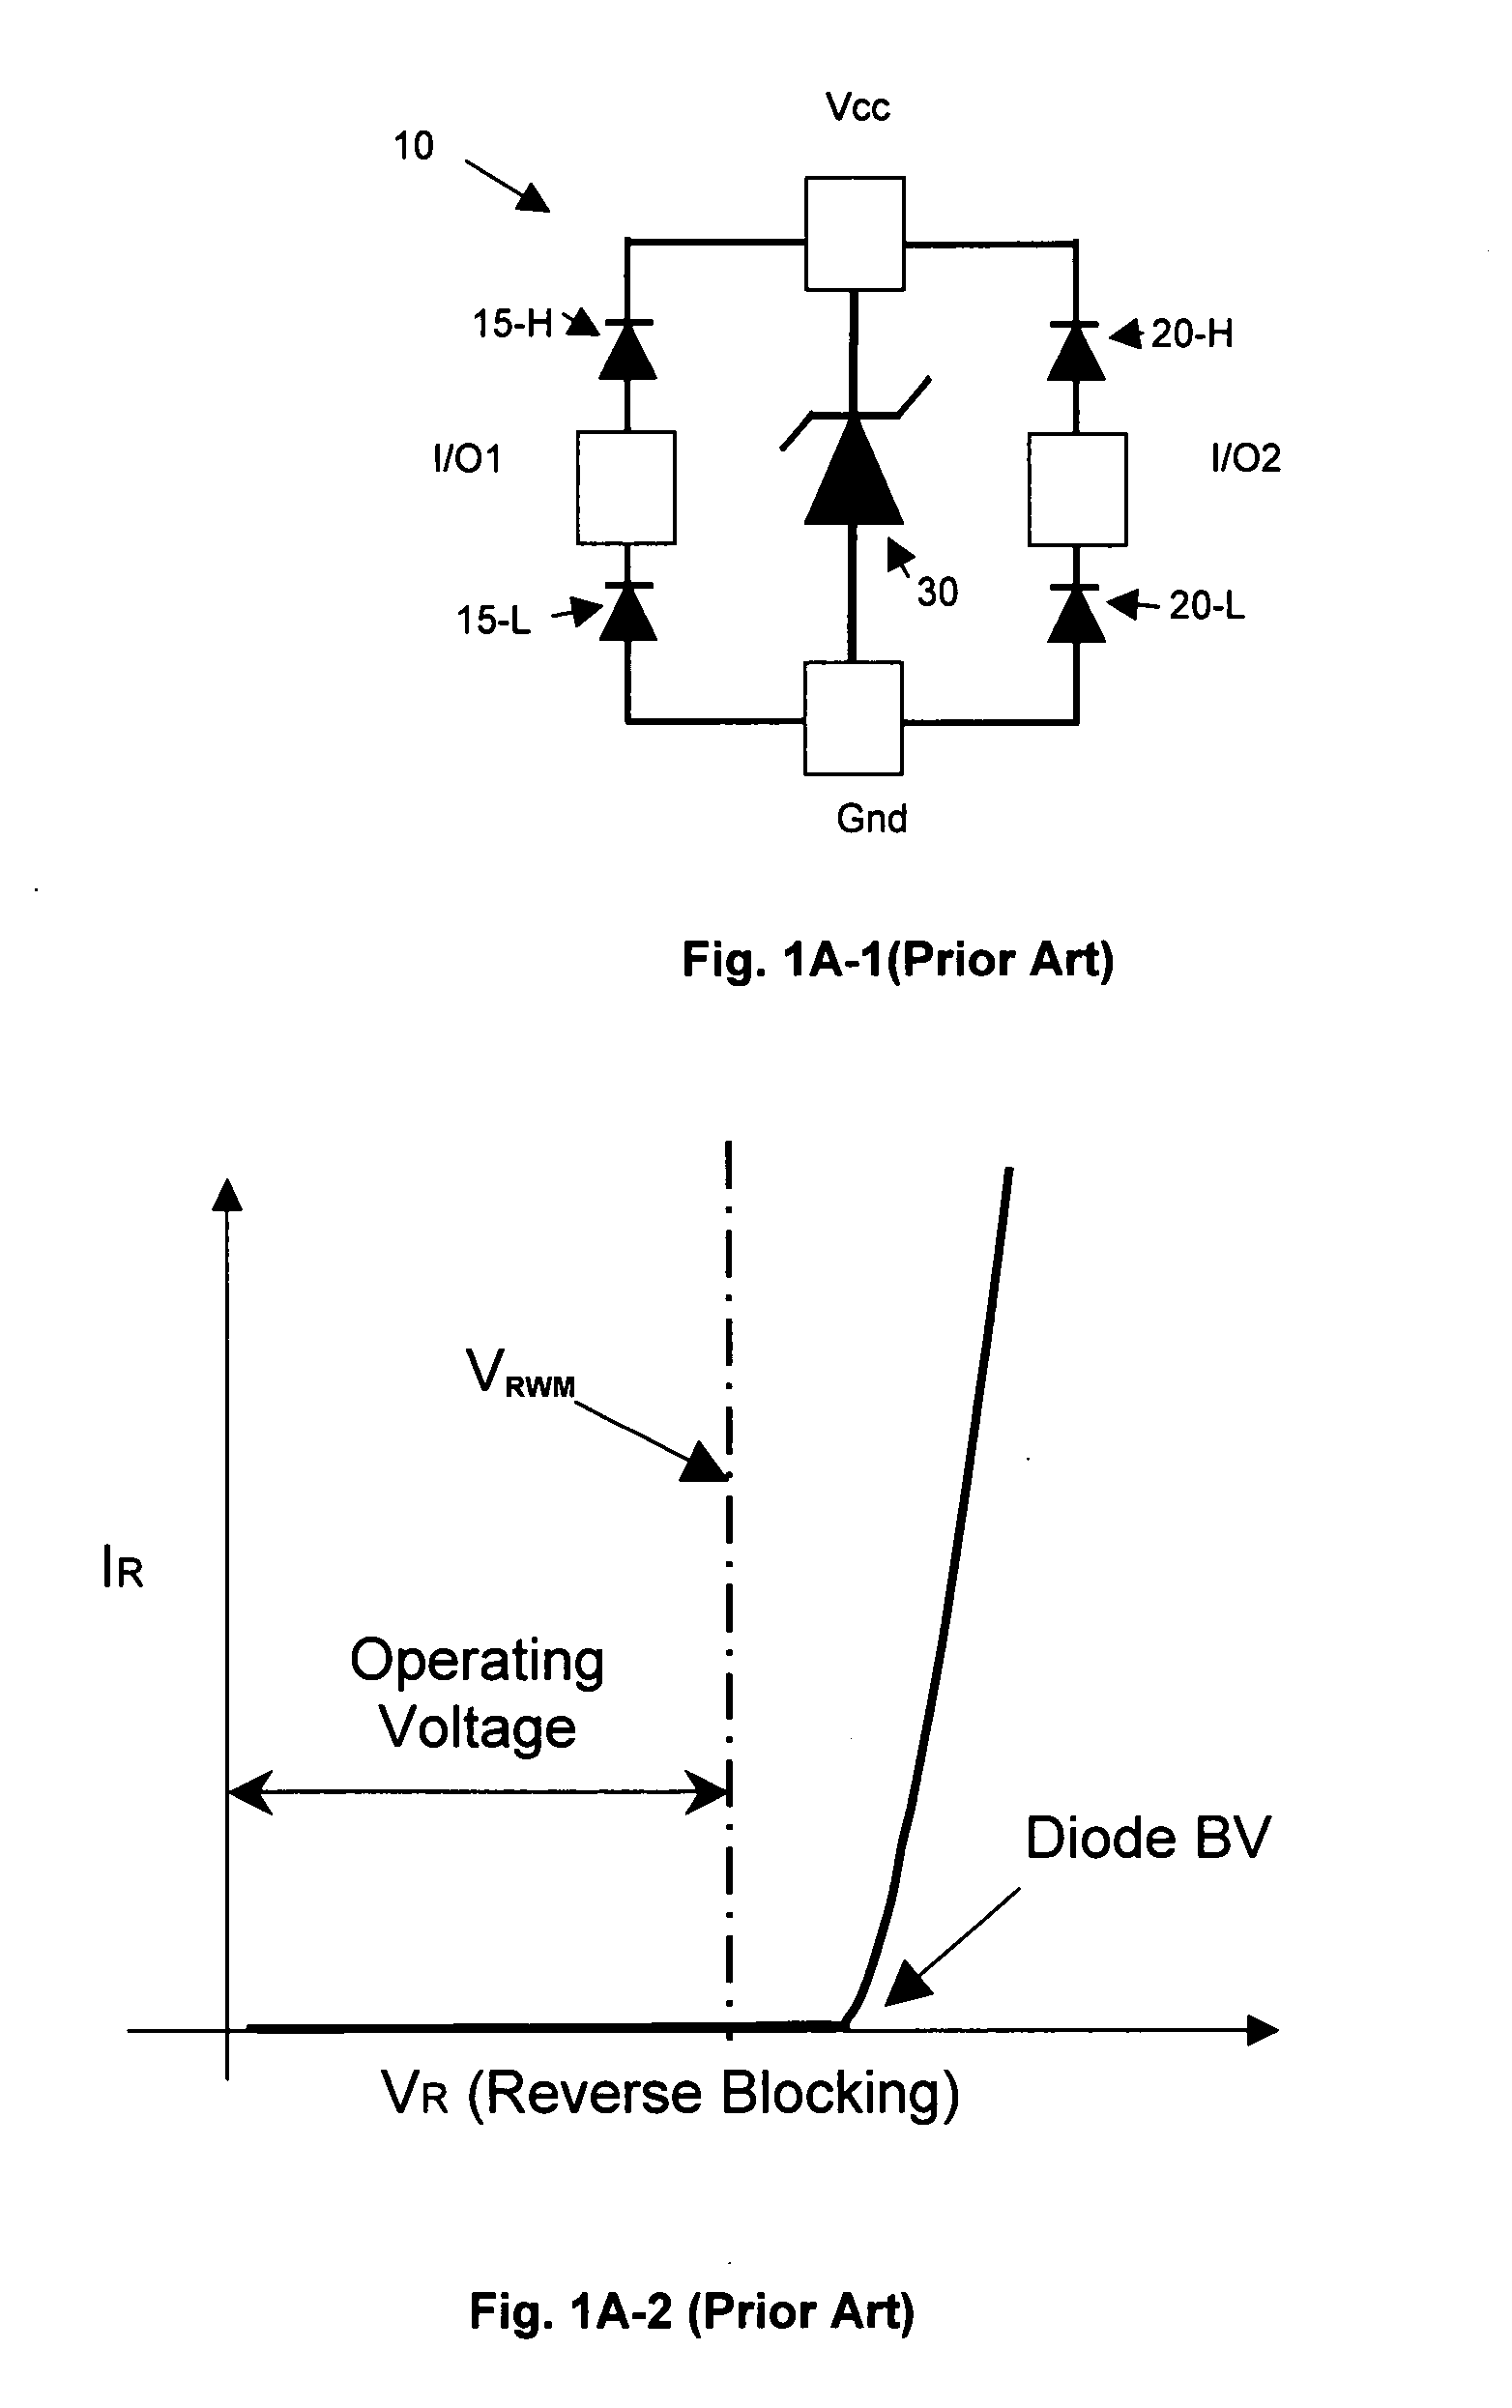 MOS transistor triggered transient voltage supressor to provide circuit protection at a lower voltage